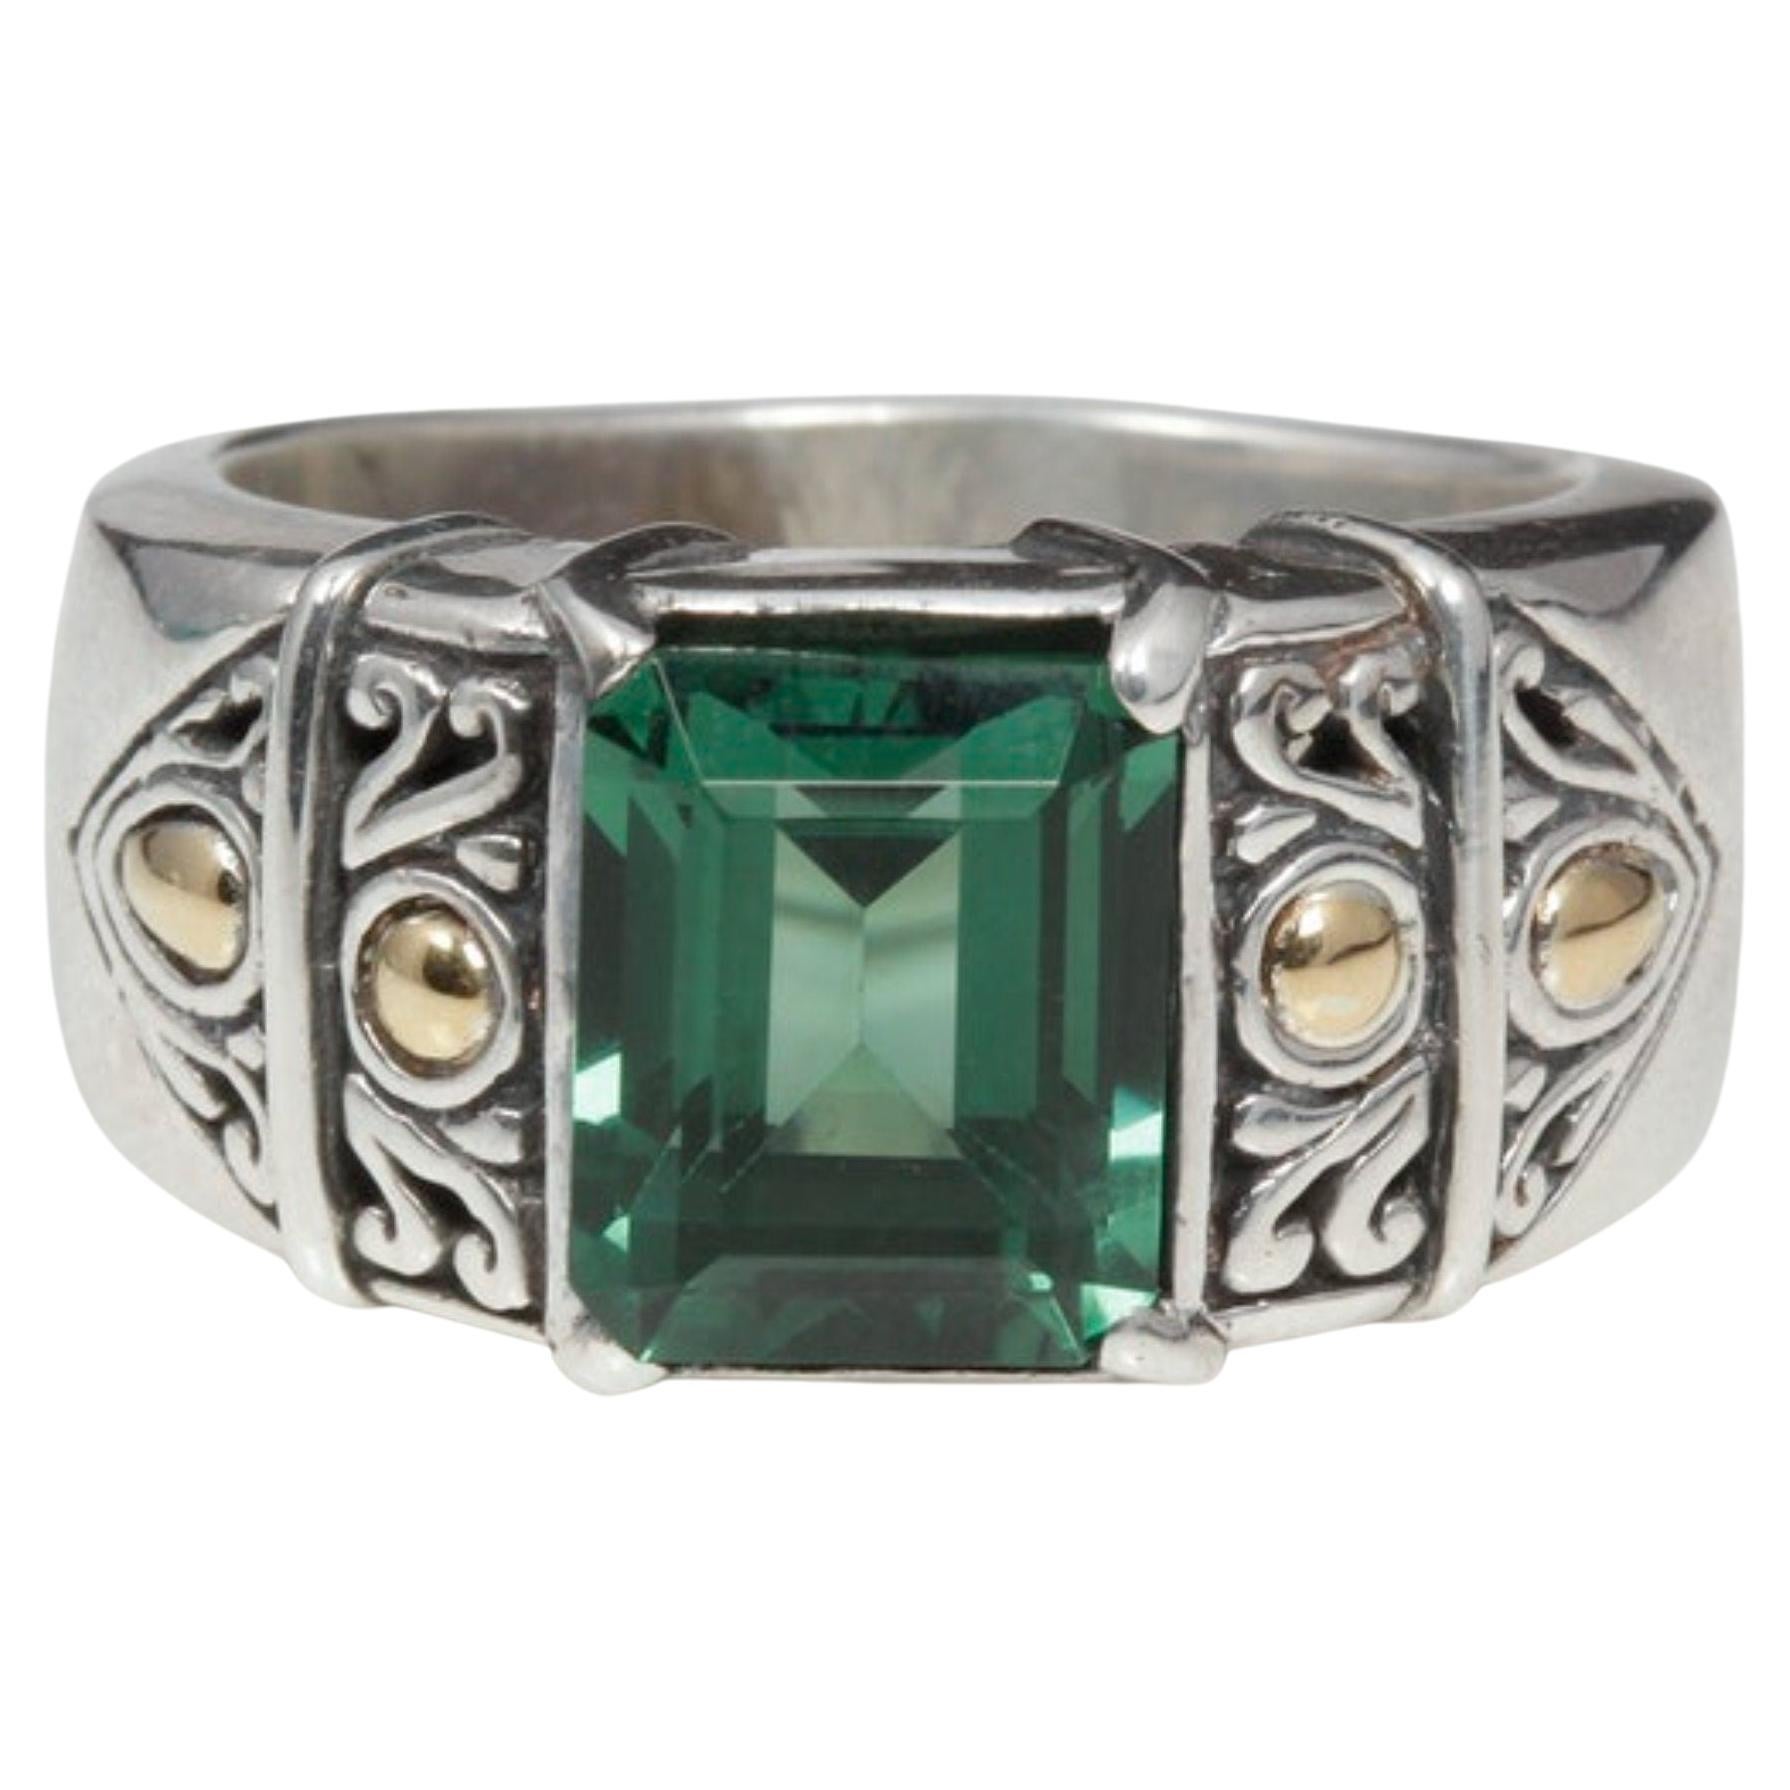 For Sale:  3 Carat Vintage Zambian Emerald Engagement Ring, Art Deco Emerald Cocktail Ring